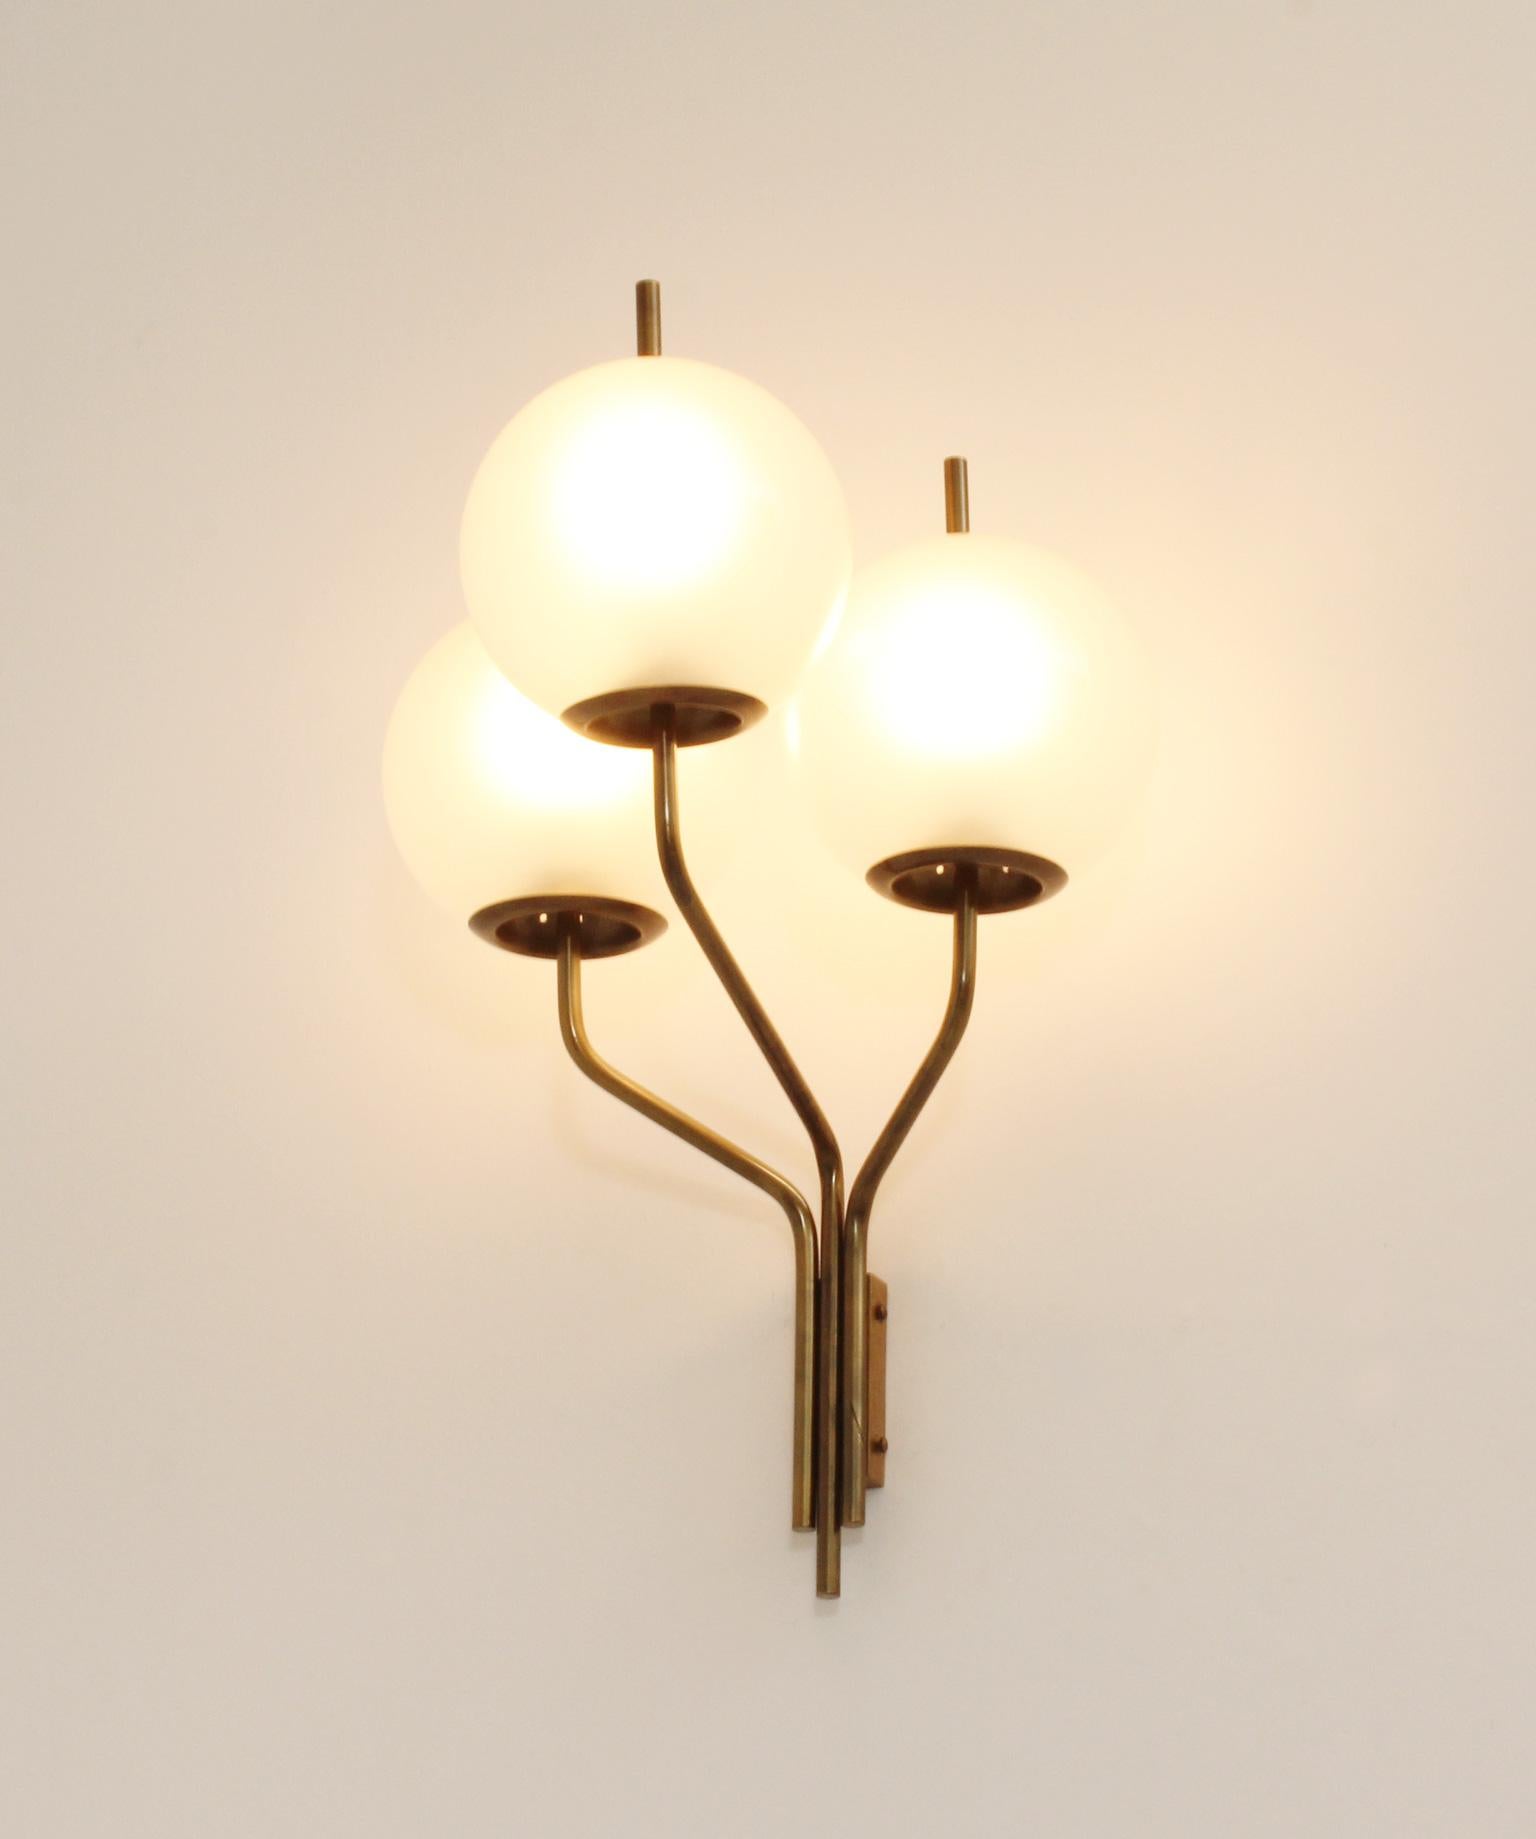 Large Sconce with Three Lights in Brass and Glass by Candle Milano, 1960s For Sale 8